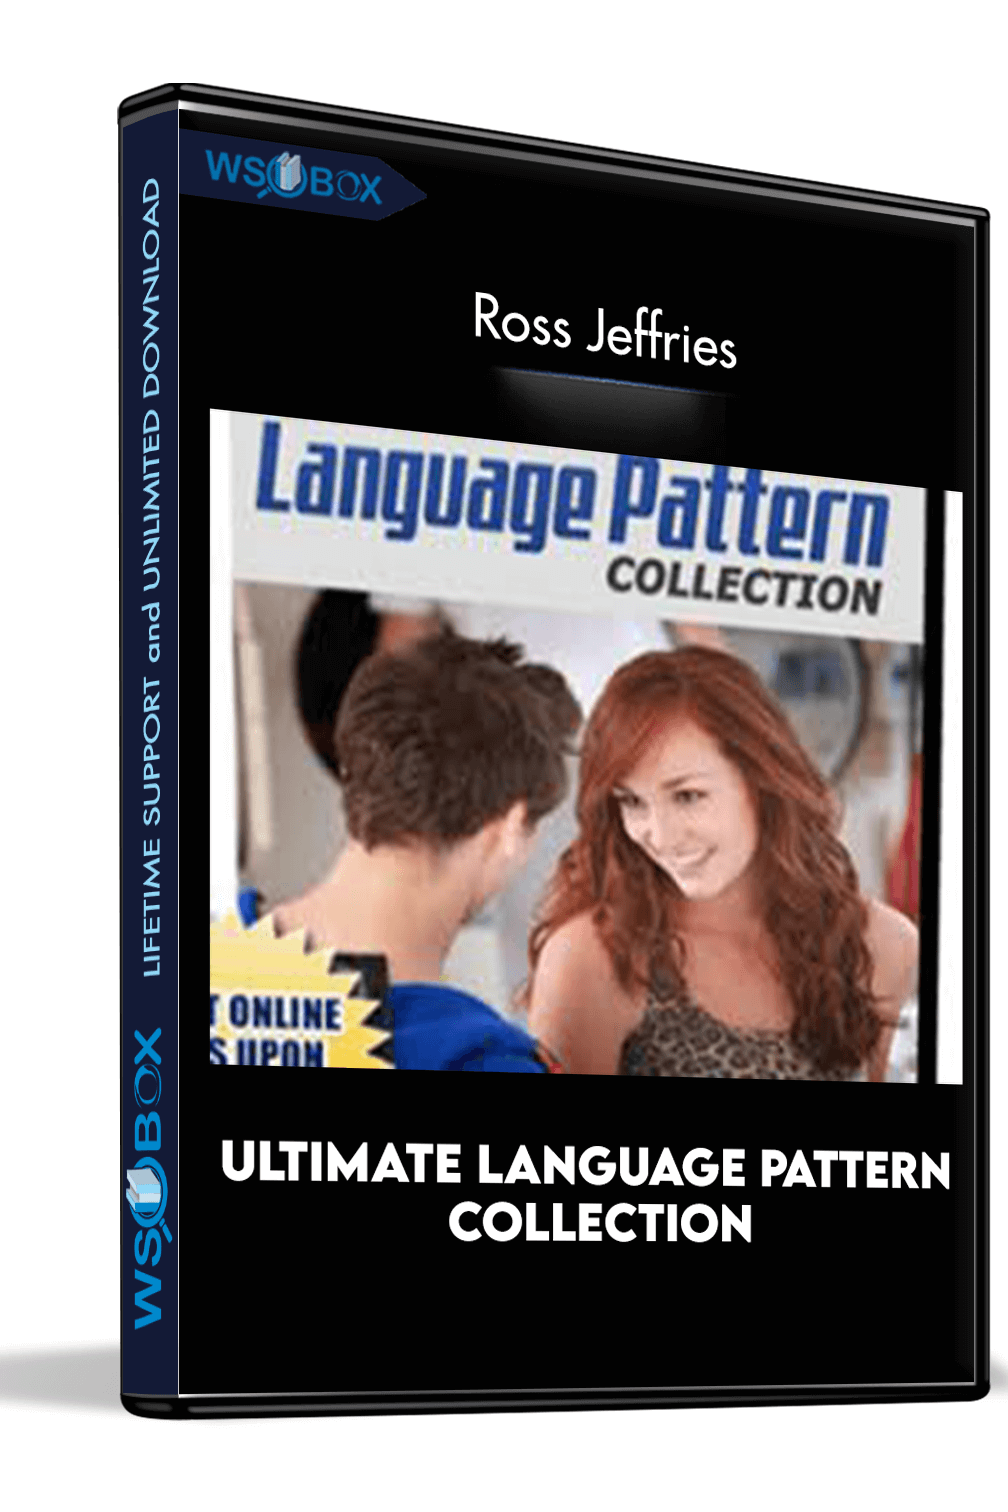 Ultimate Language Pattern Collection – Ross Jeffries